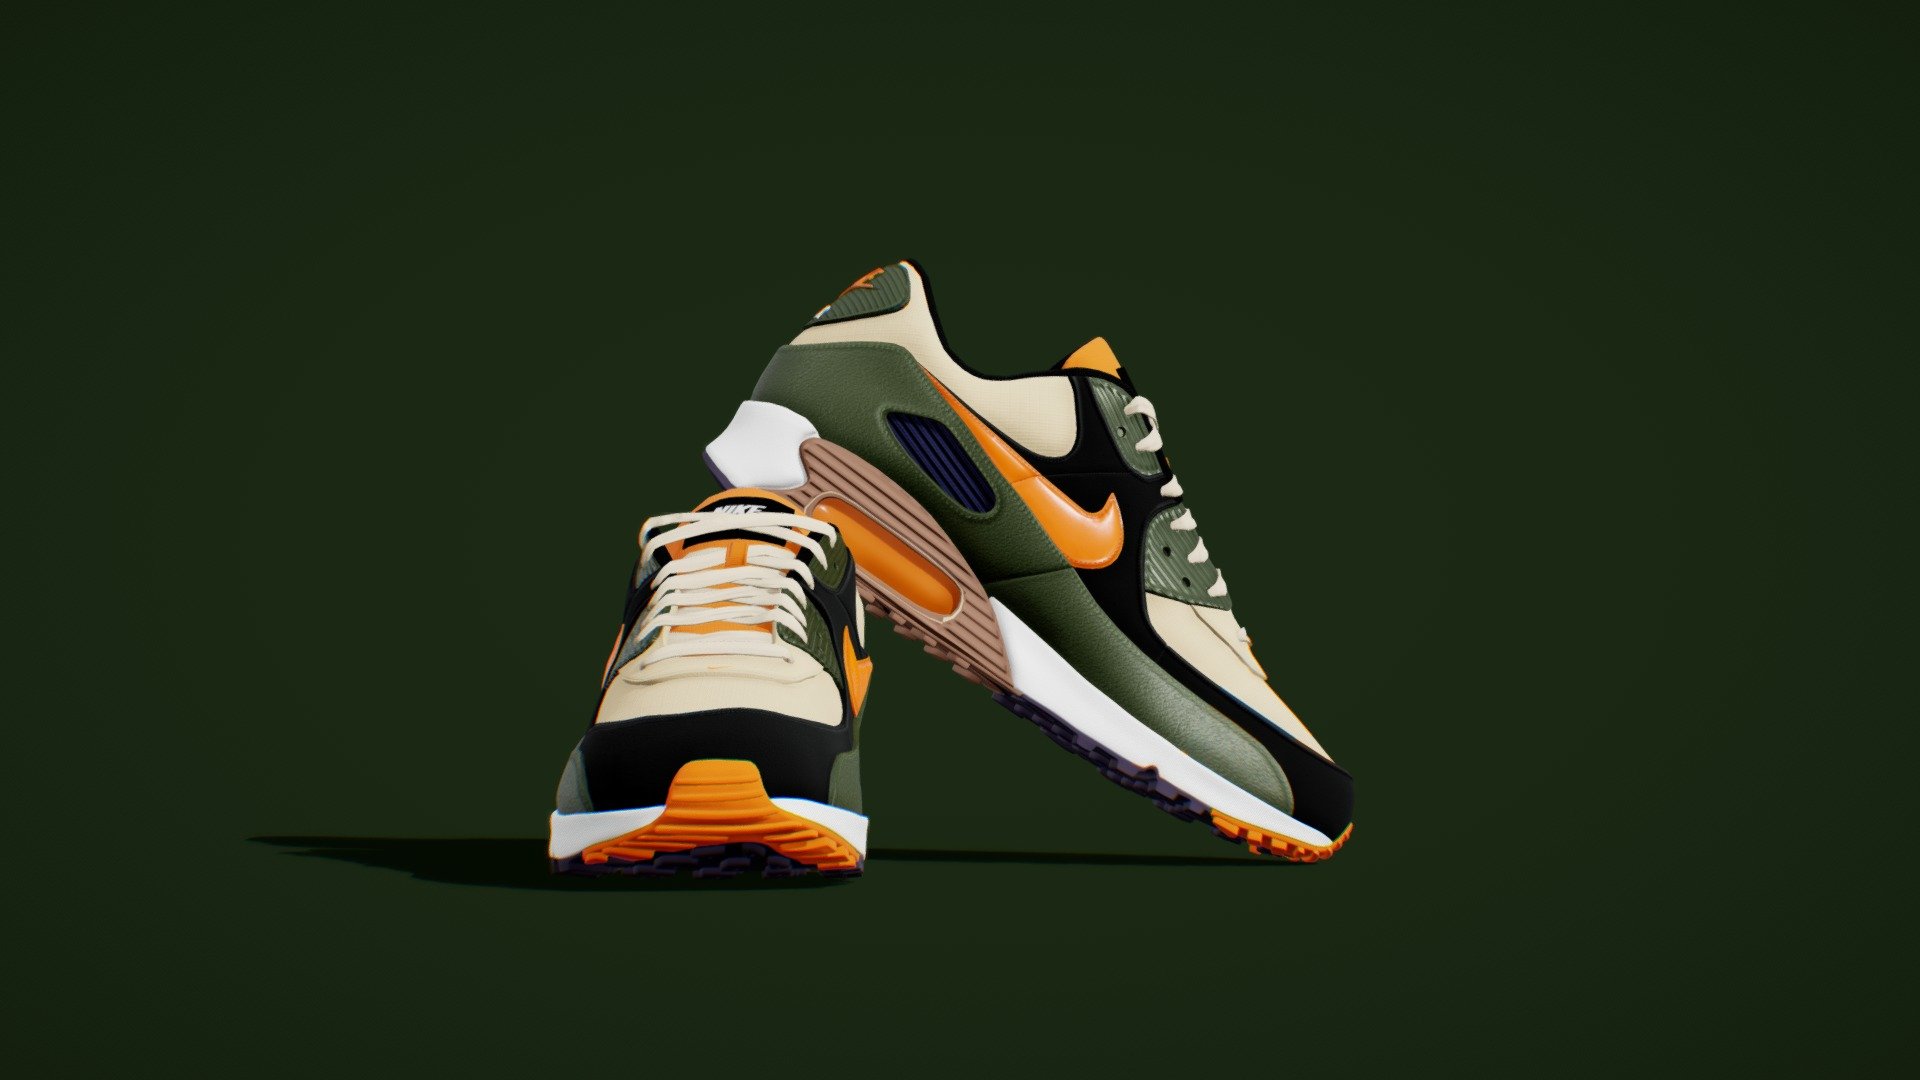 This are Airmax NIKE Shoes.
Textured differently,
There are 6 different textures and this is 6 of 6 Version.
Textures in 4k resolution.

Buy the whole pack of 6 at 50% OFF Here
https://skfb.ly/oxQVu - Airmax - Nike Shoes 06 - Buy Royalty Free 3D model by 5th Dimension (@5th-Dimension) 3d model